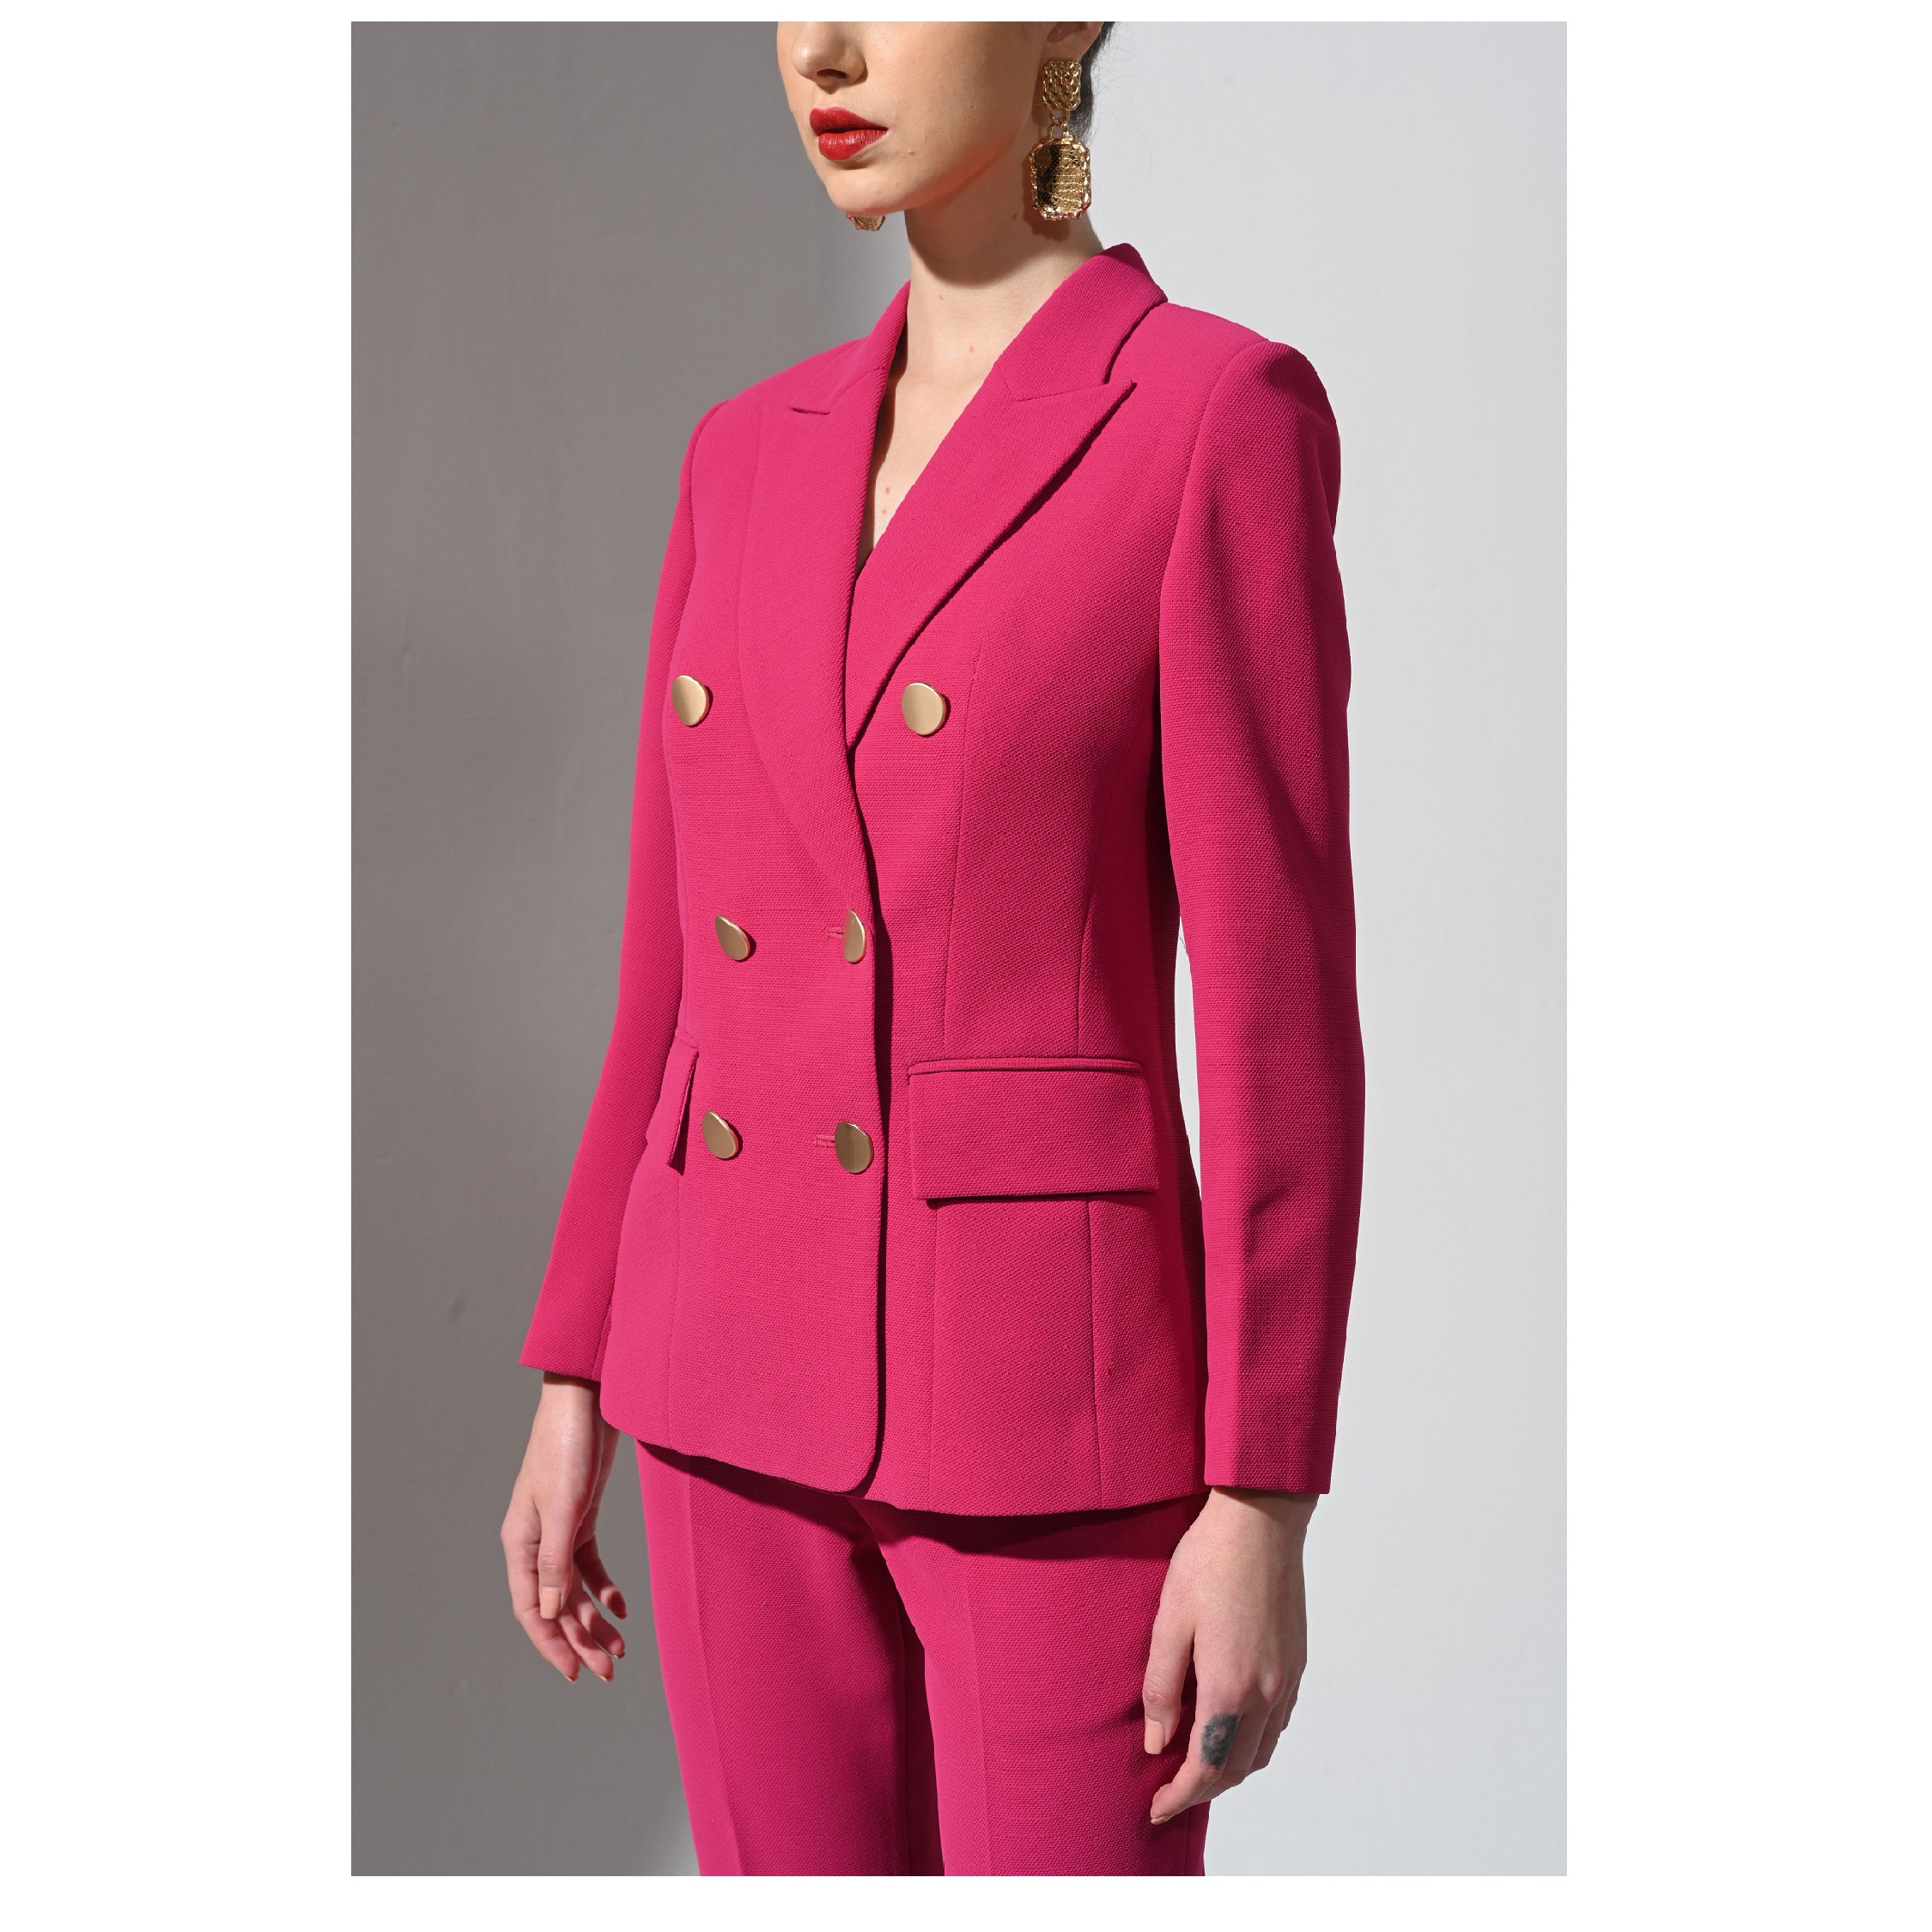 Premium Quality Women's Suits Anti-Static Breathable And Viscose Polyester Material From Vietnam